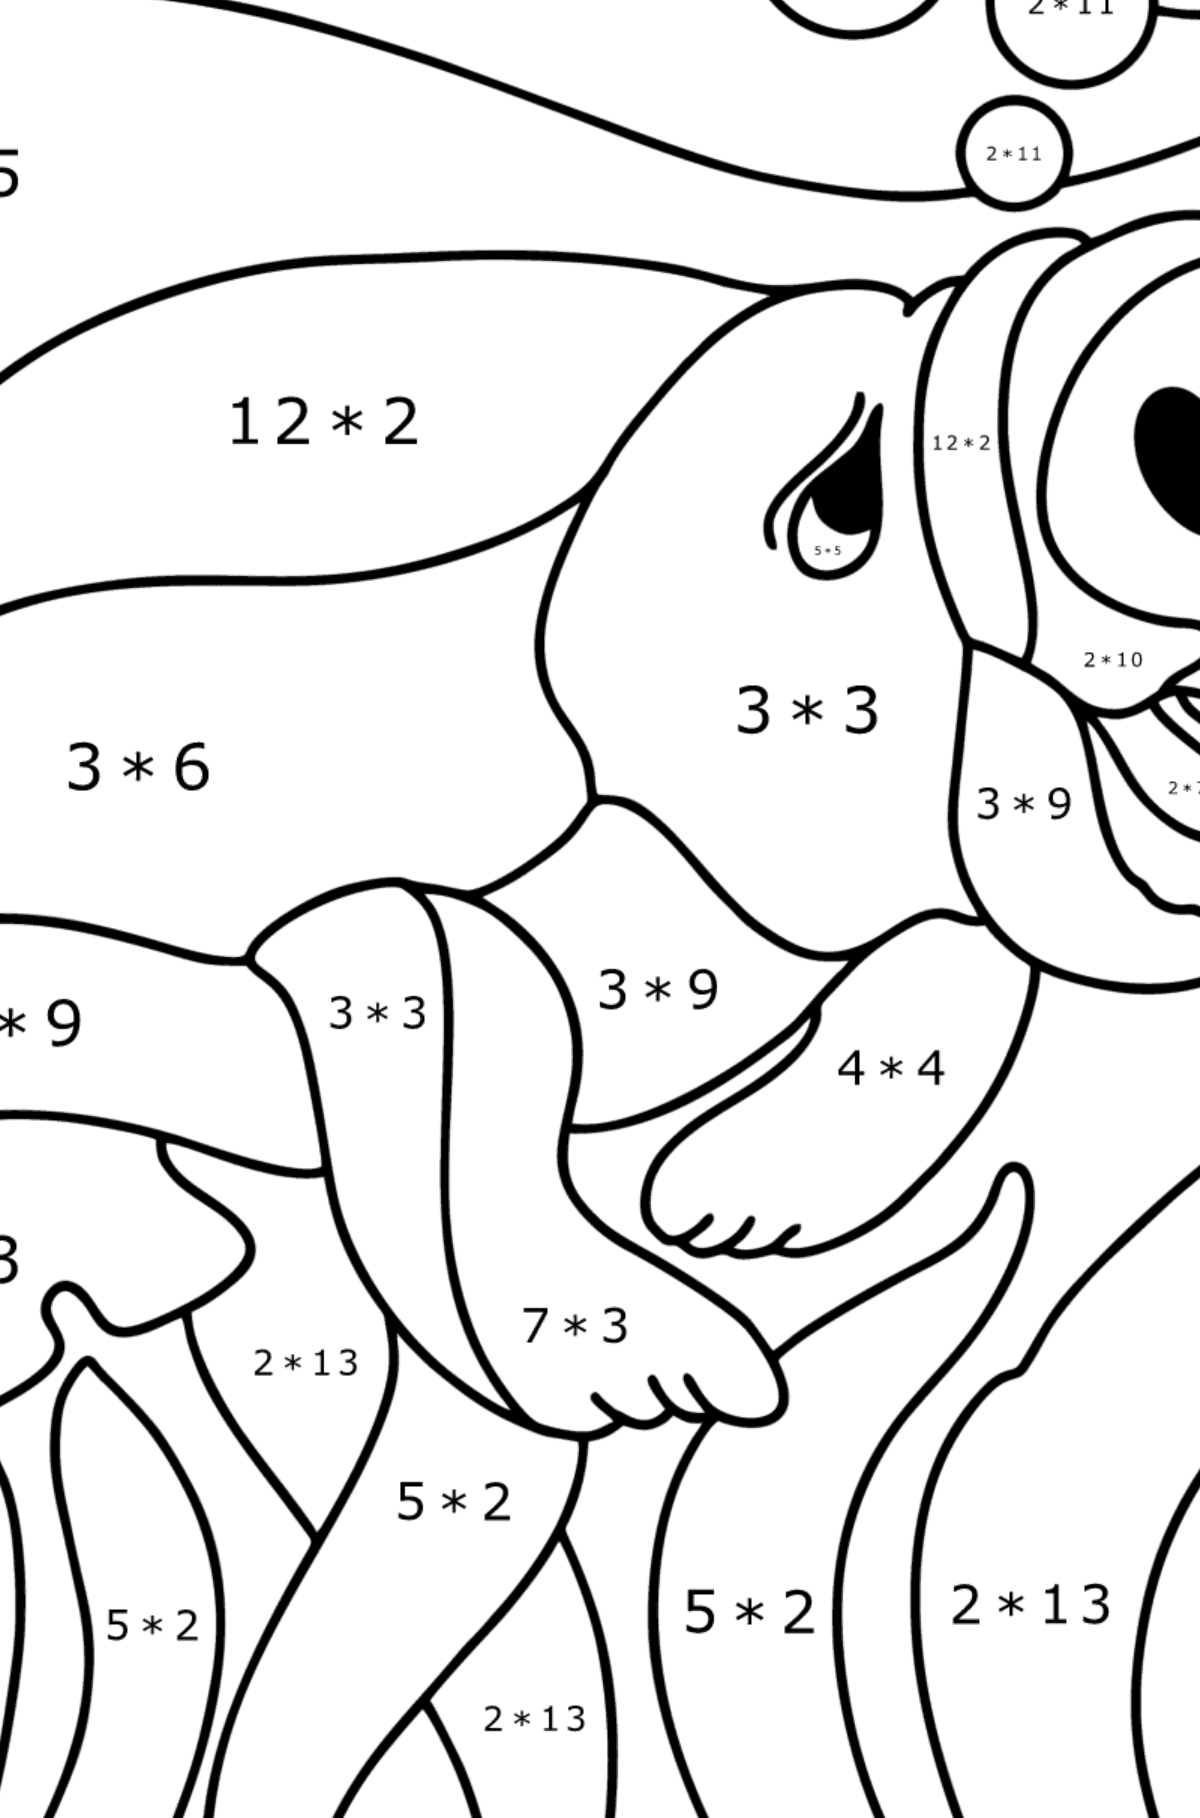 Stellar Cow coloring page - Math Coloring - Multiplication for Kids